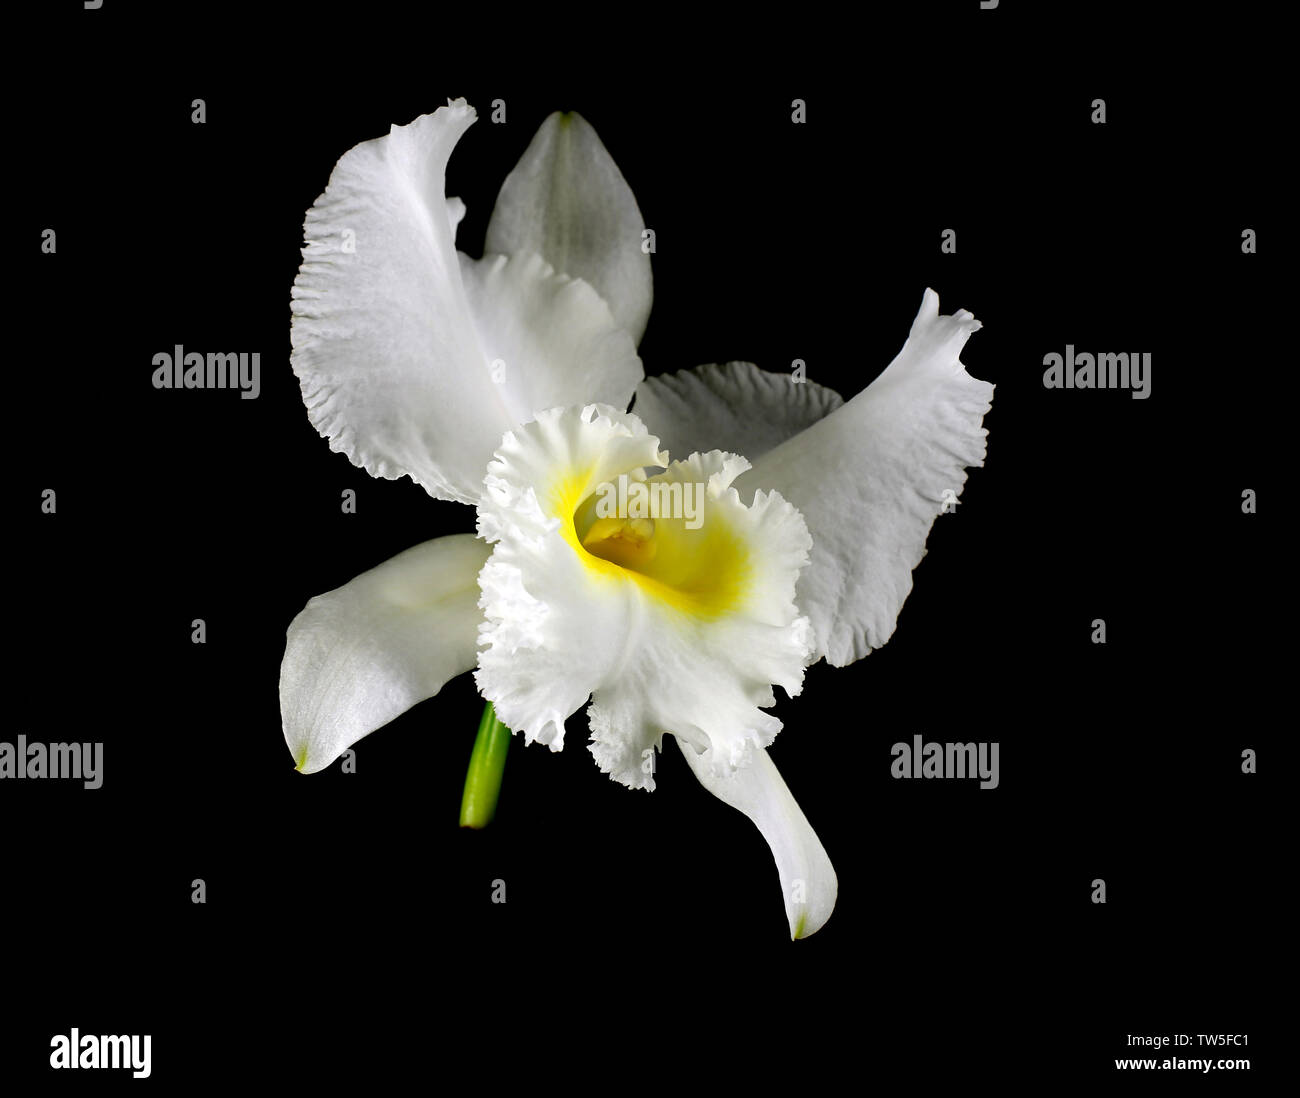 Very large full fragrant ivory-white cattleya flower (Cattleya lueddemanniana alba) with lemon-yellow throat and frilly lips isolated on a black bacgr Stock Photo